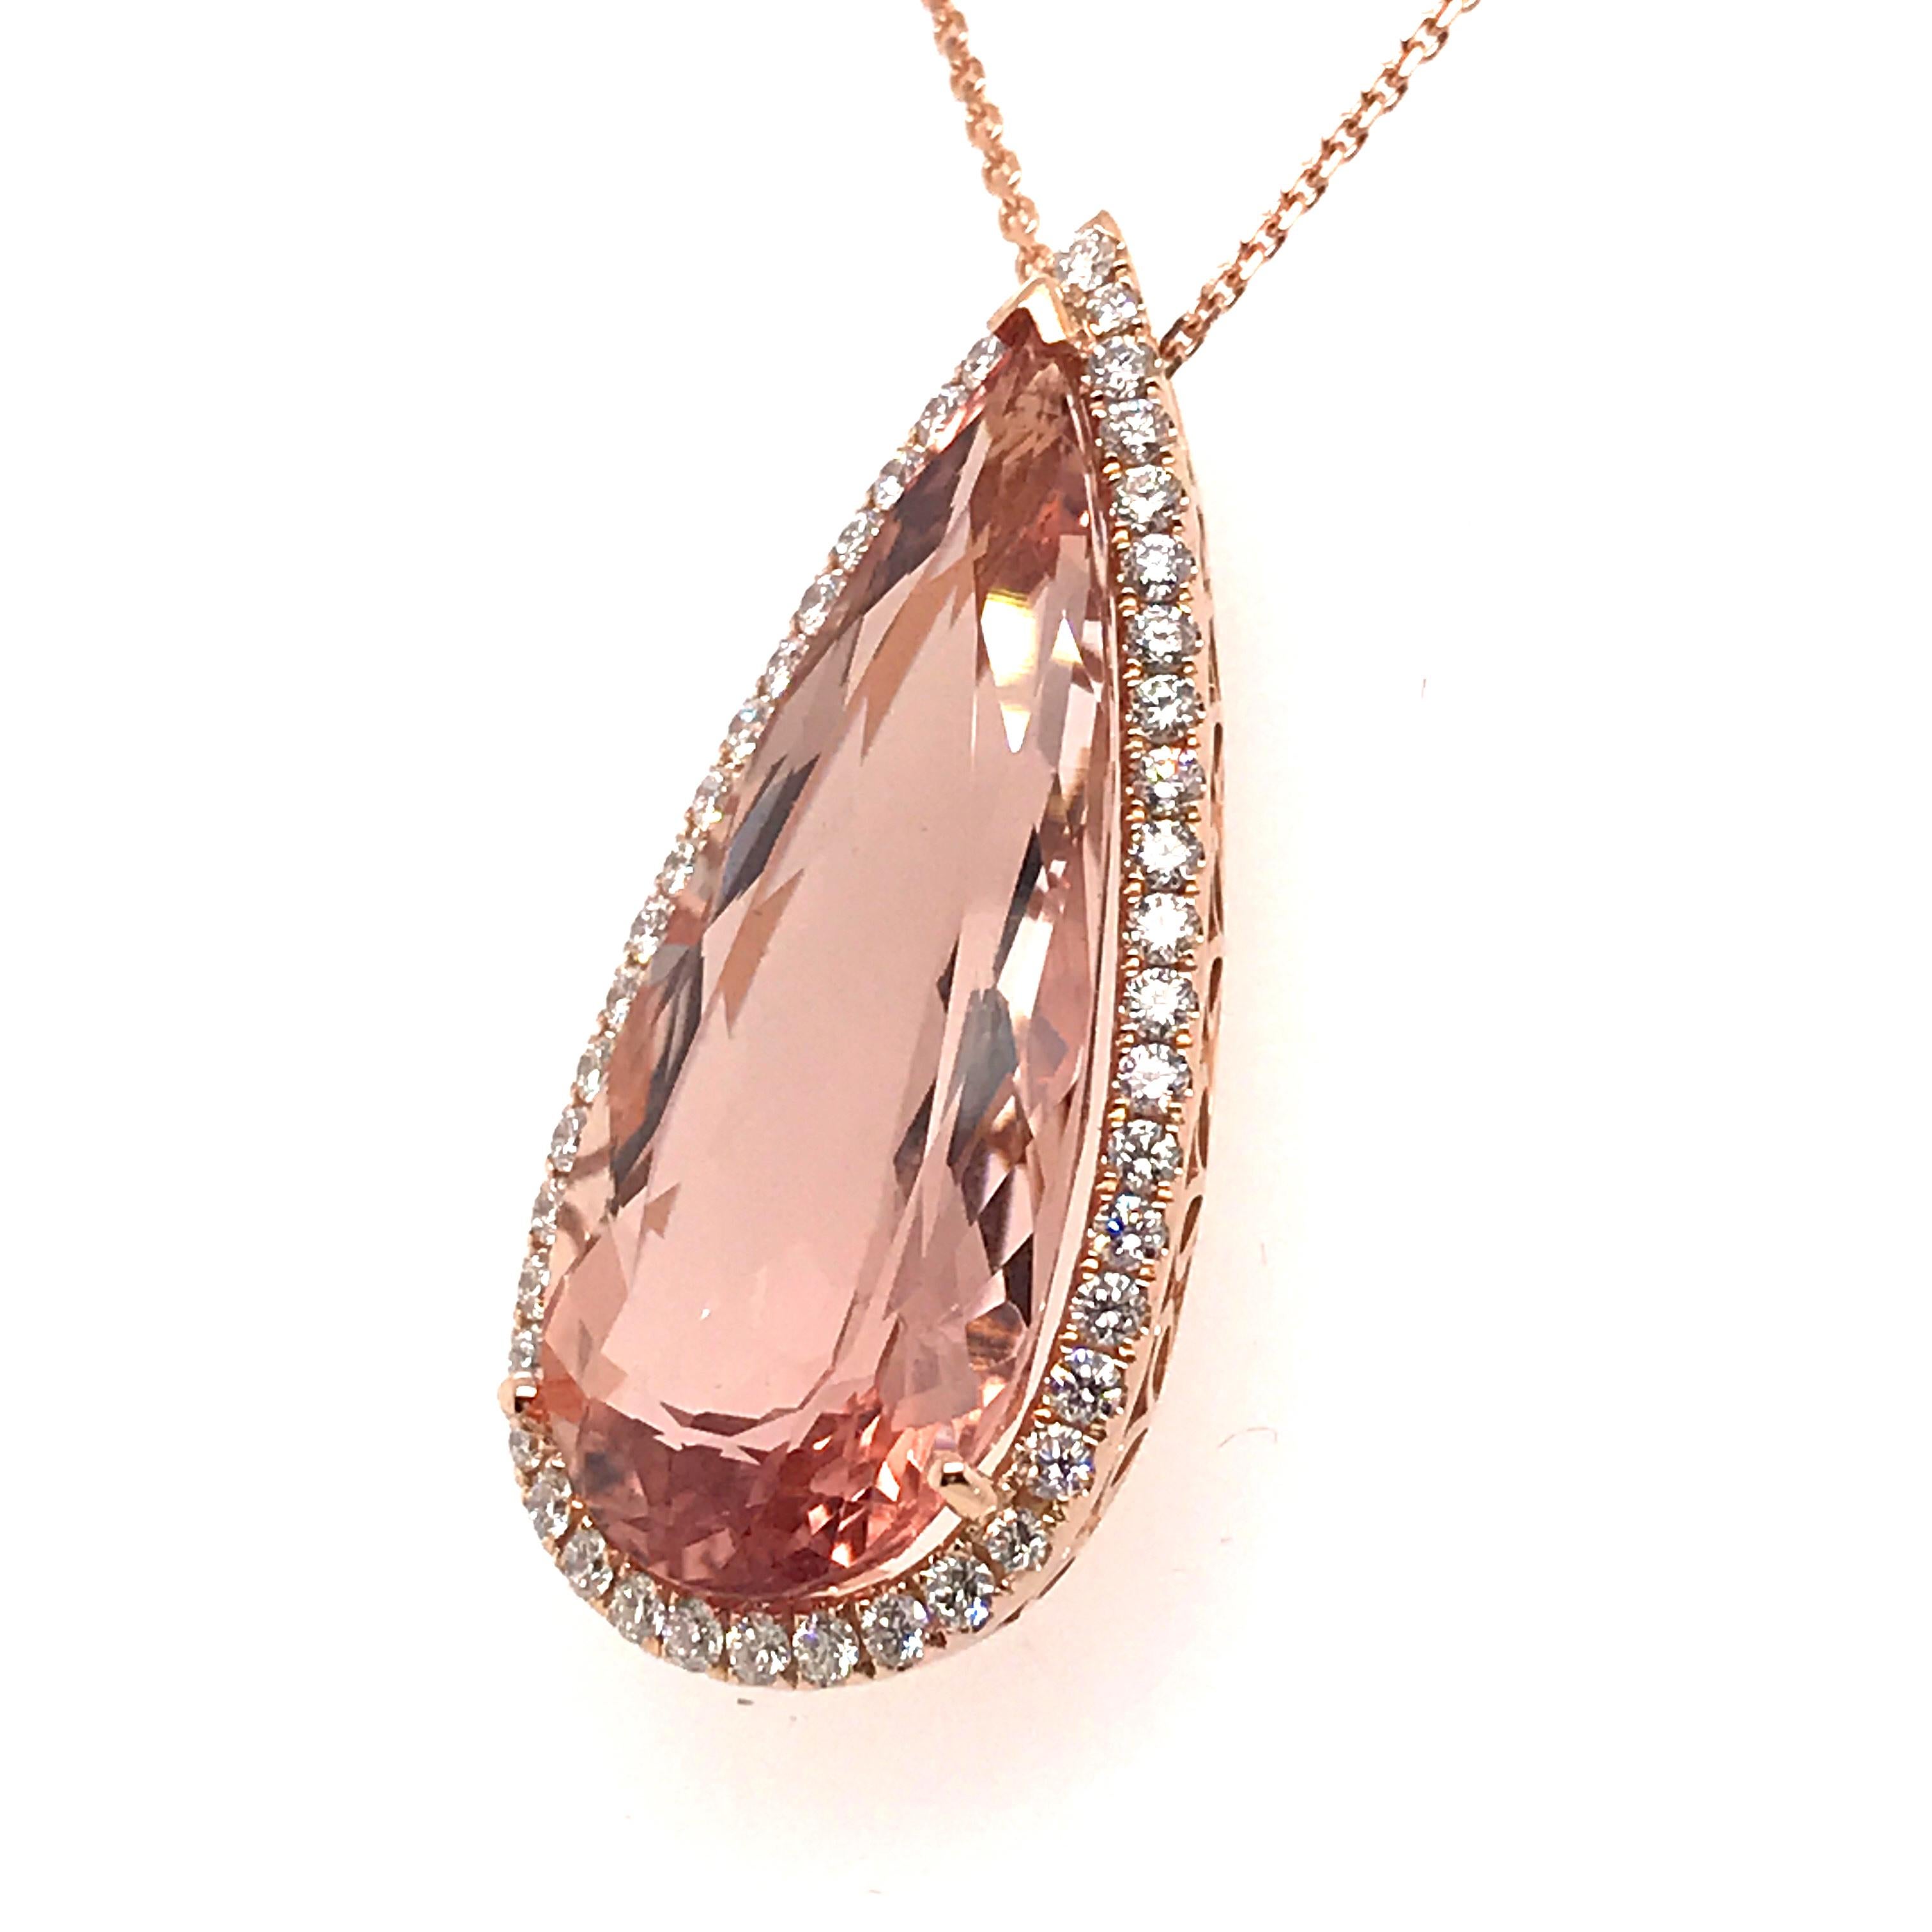 Contemporary Morganite Pear Shape with Diamond on Pendant Necklaces Rose Gold 18 Karat